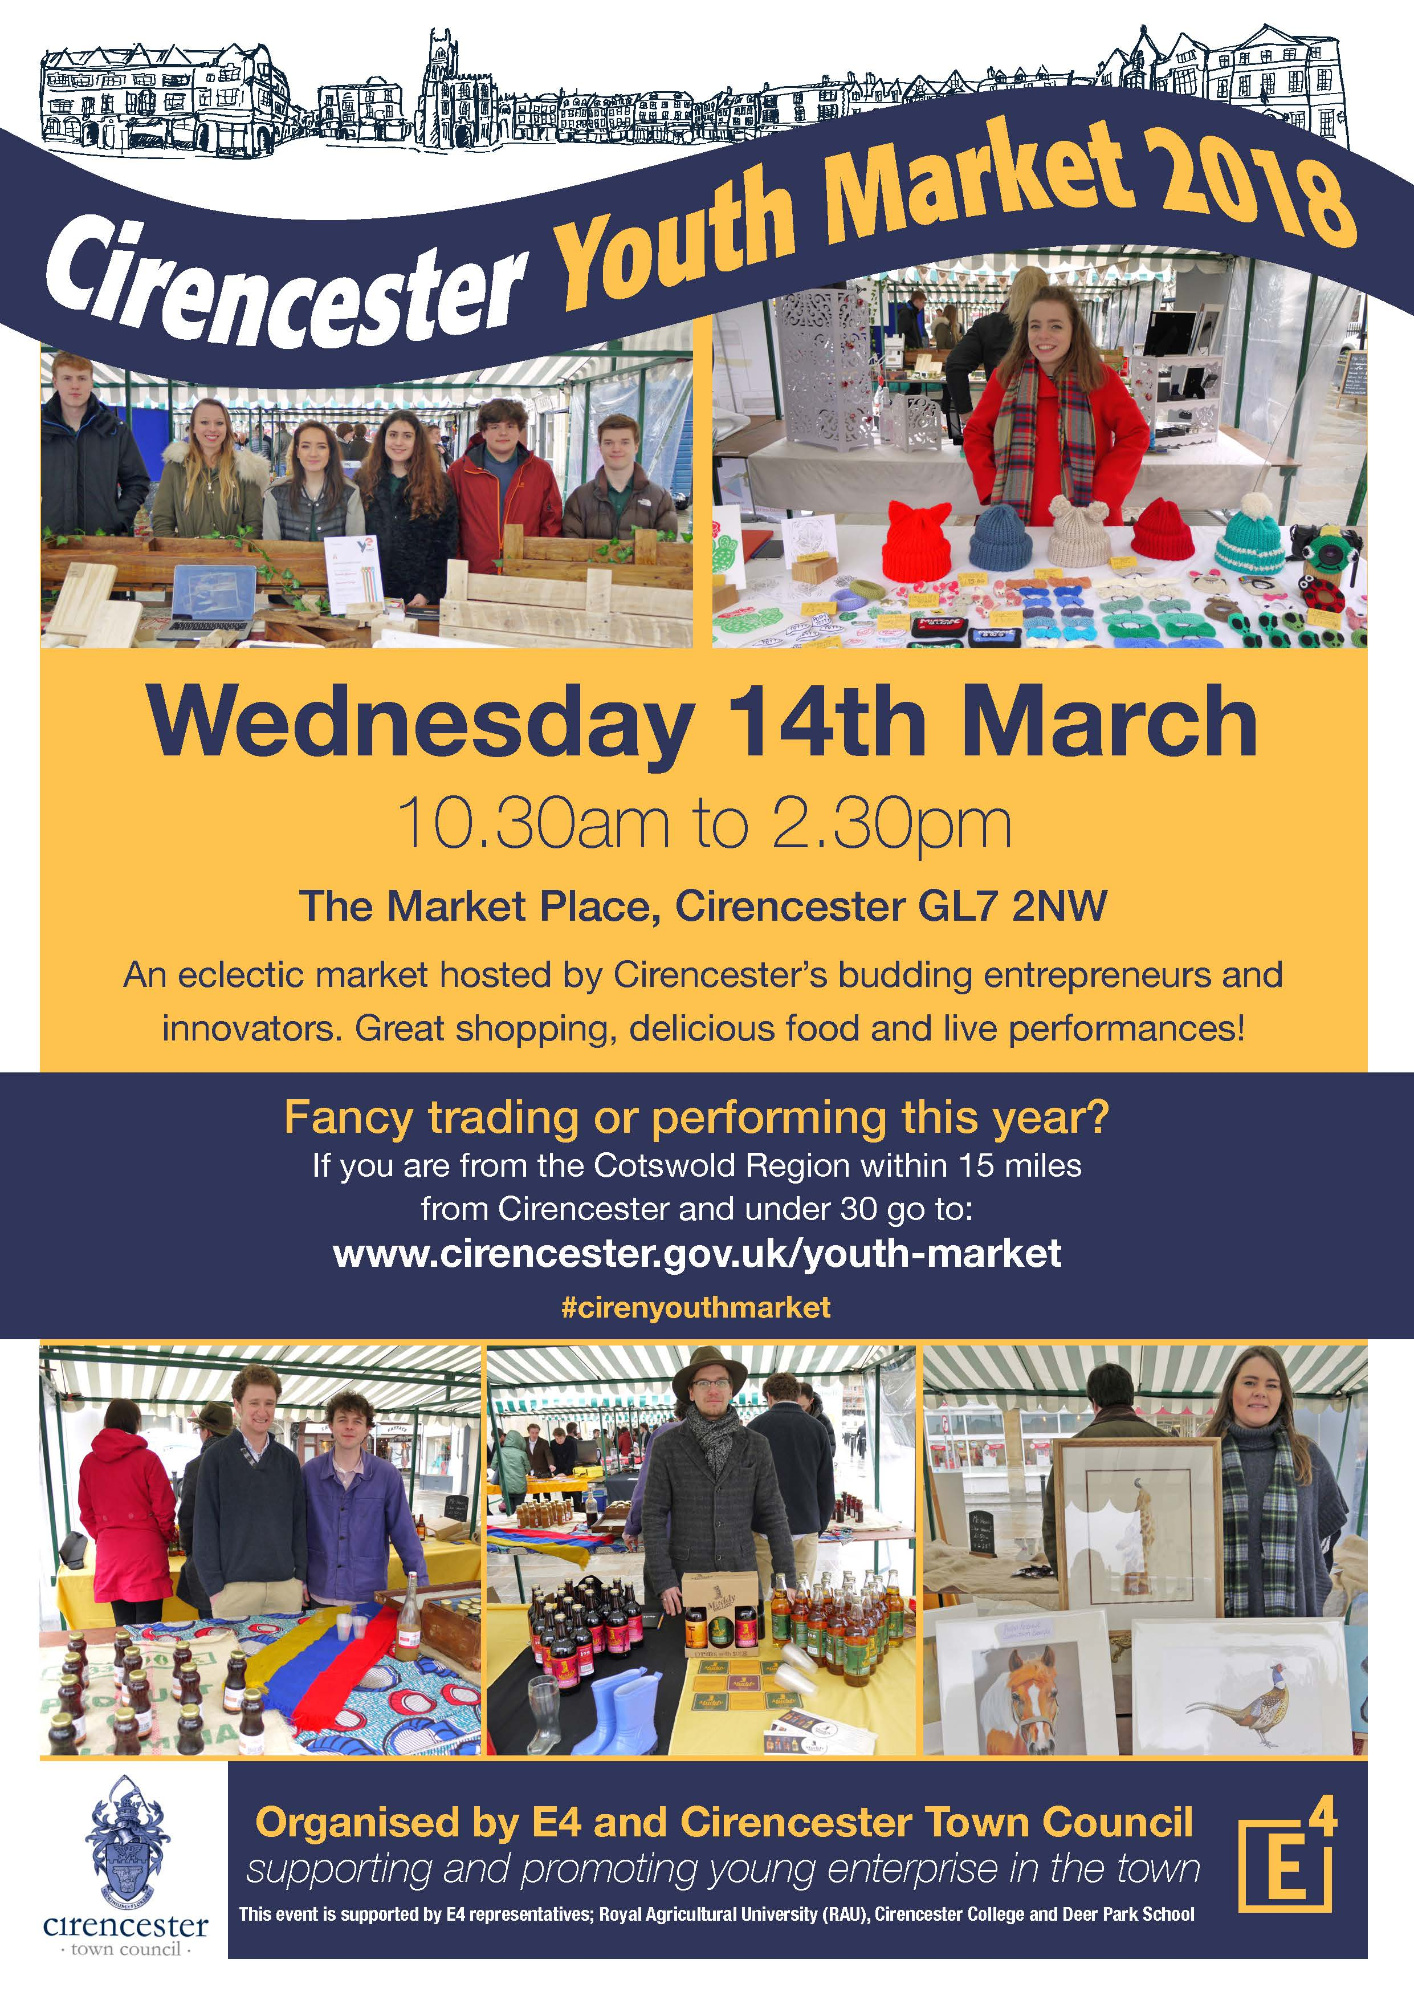 cirencester youth market 2018